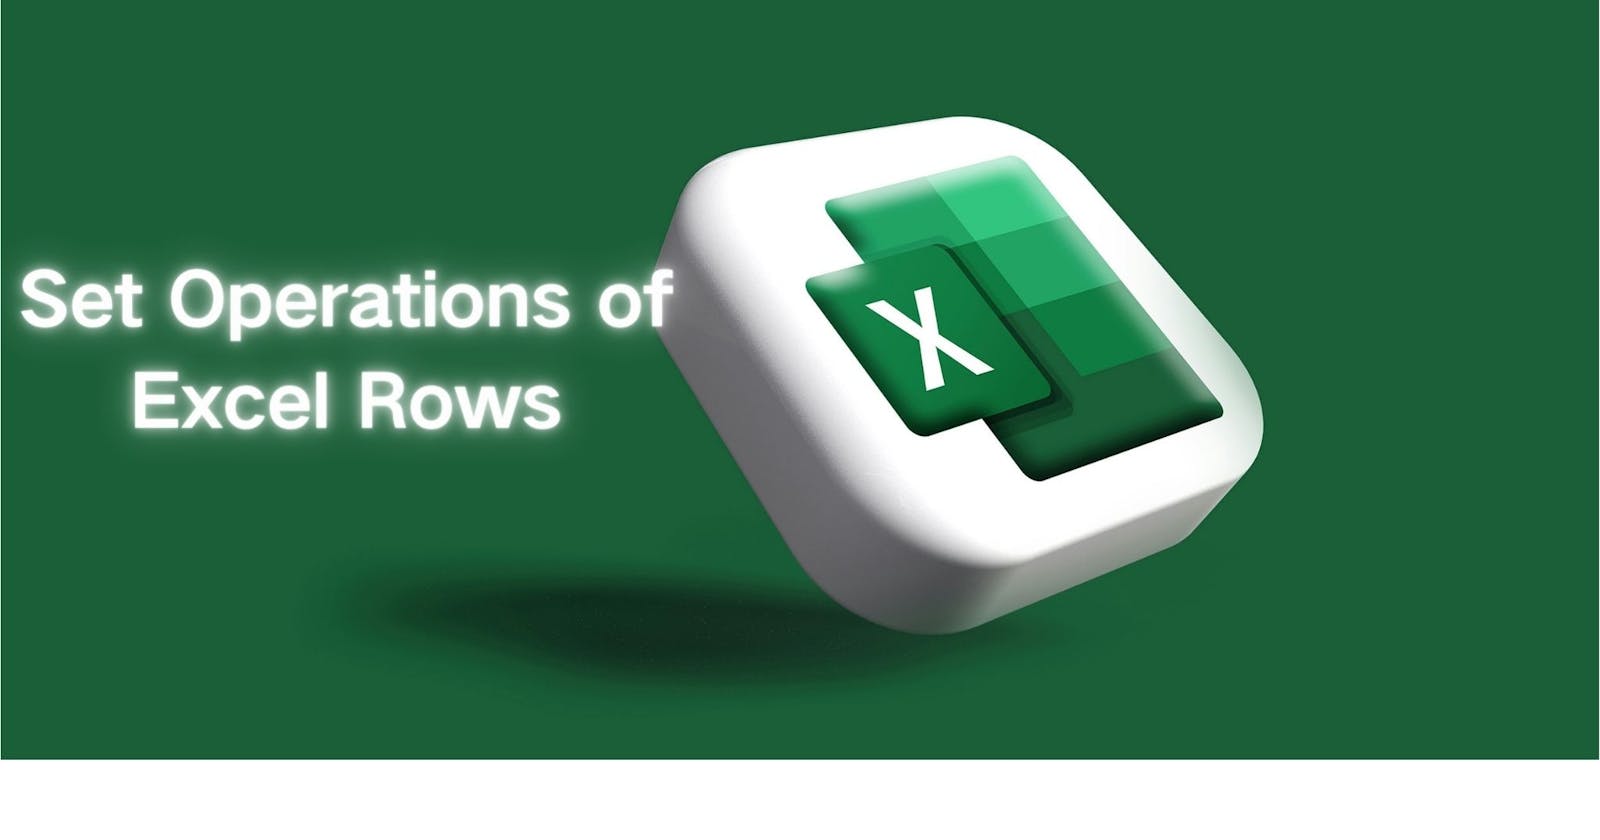 Set Operations of Excel Inter Row Data (Intersection, Union, and Difference)